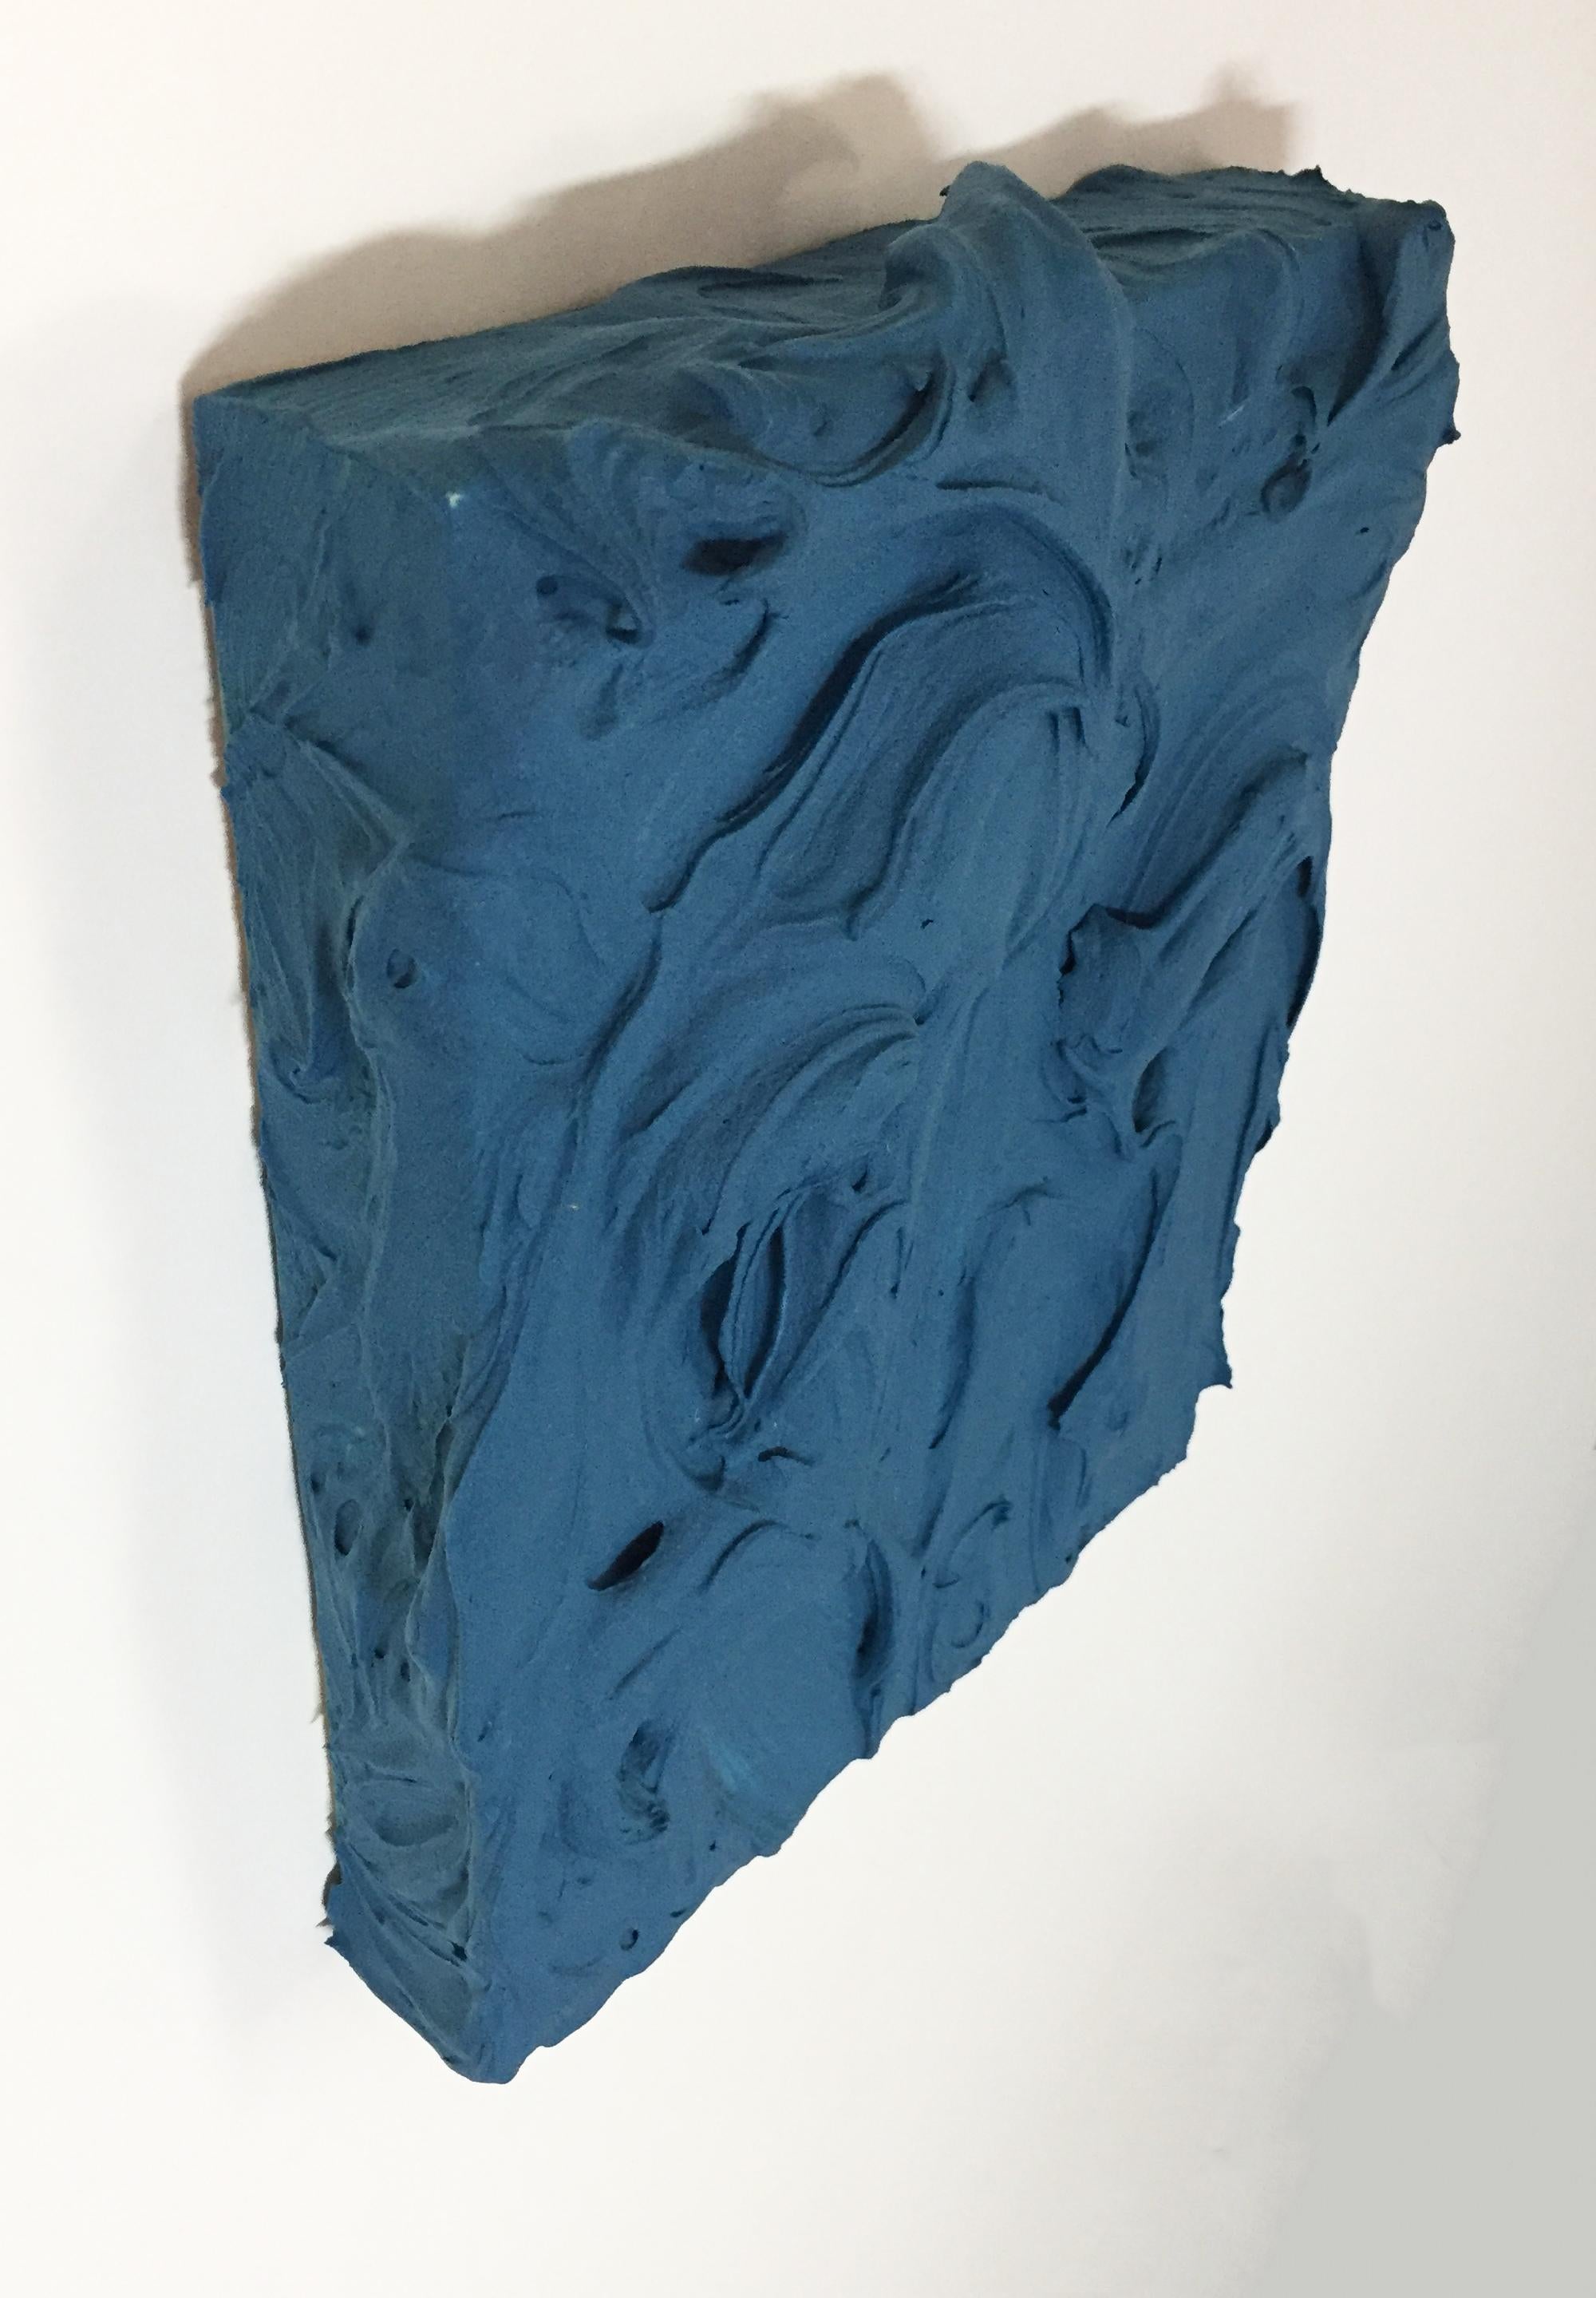 Deep Teal Excess (impasto texture thick painting monochrome pop bold design) - Brown Abstract Sculpture by Chloe Hedden